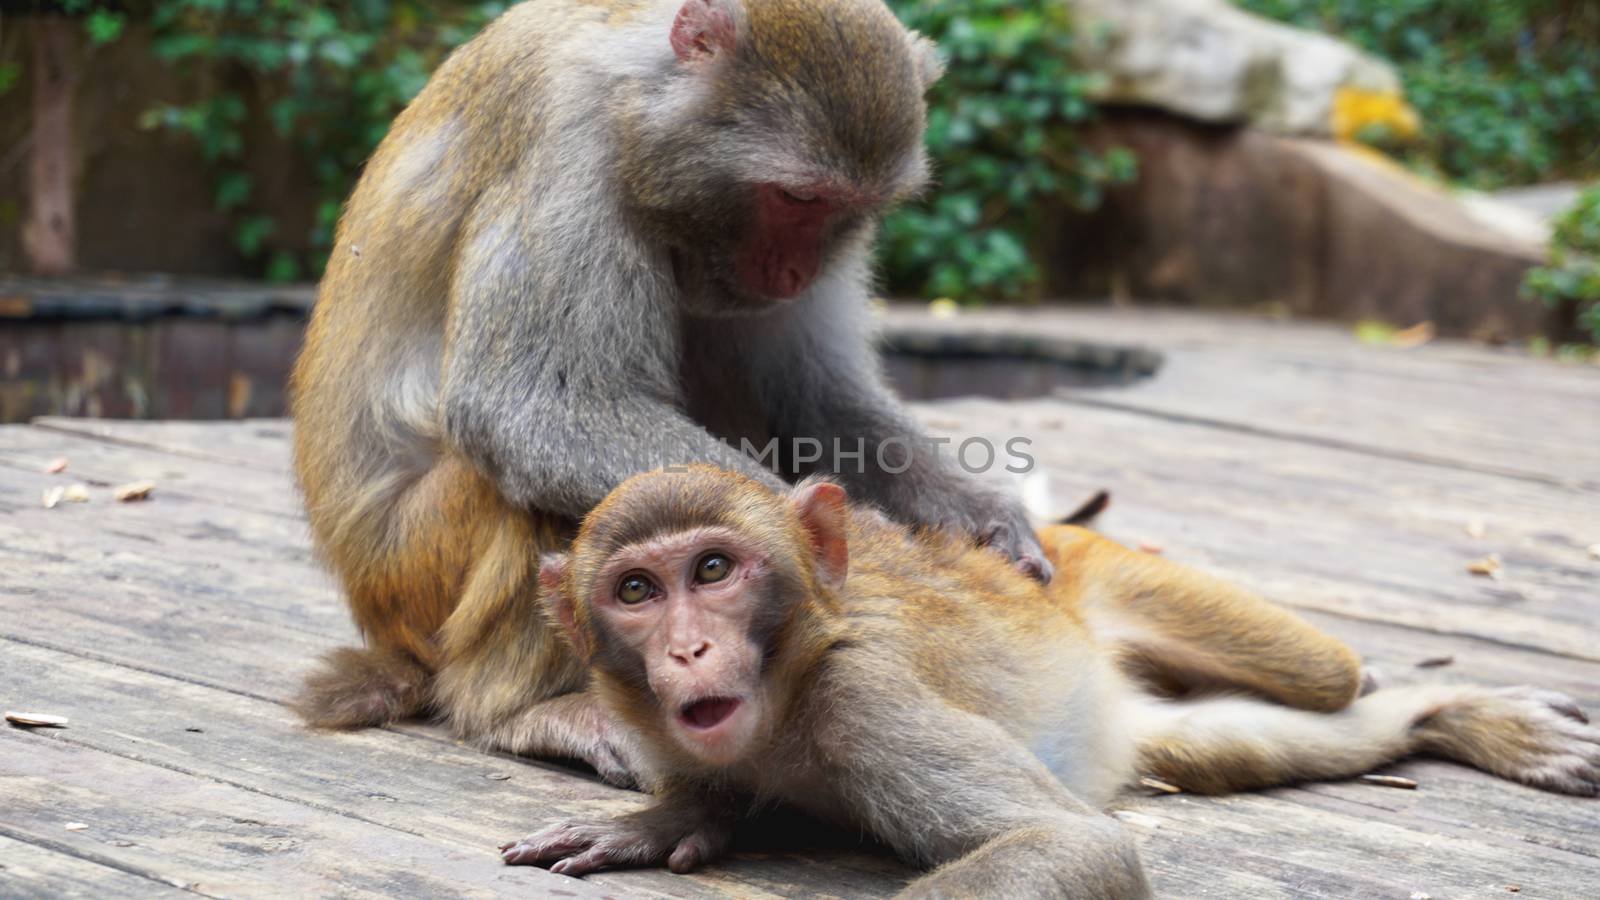 Monkey family, mother taking care of a baby, China by natali_brill